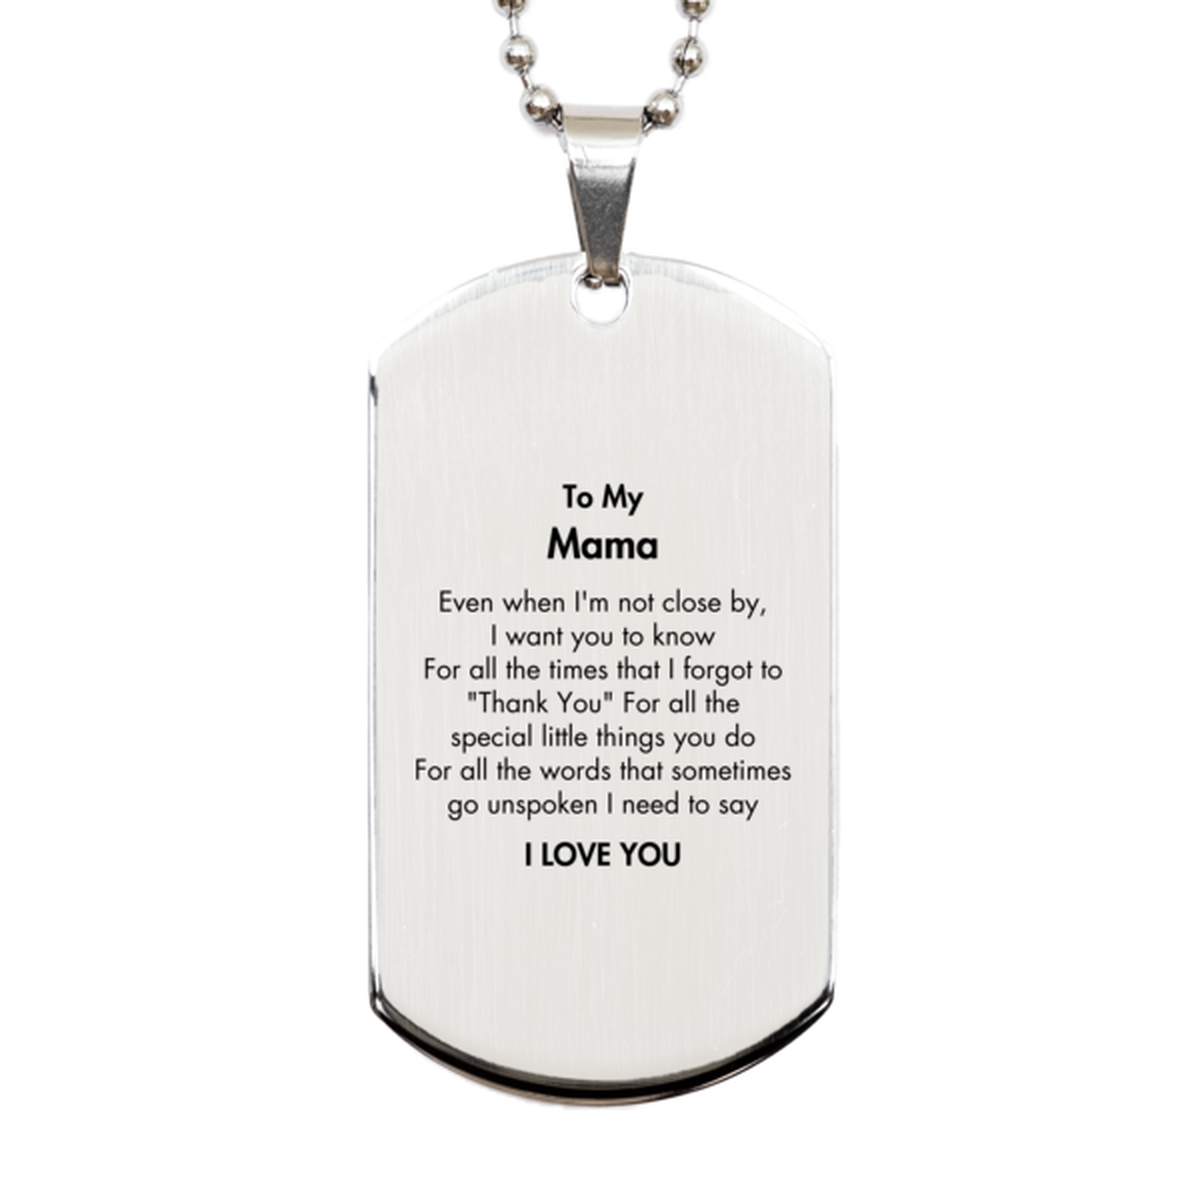 Thank You Gifts for Mama, Keepsake Silver Dog Tag Gifts for Mama Birthday Mother's day Father's Day Mama For all the words That sometimes go unspoken I need to say I LOVE YOU